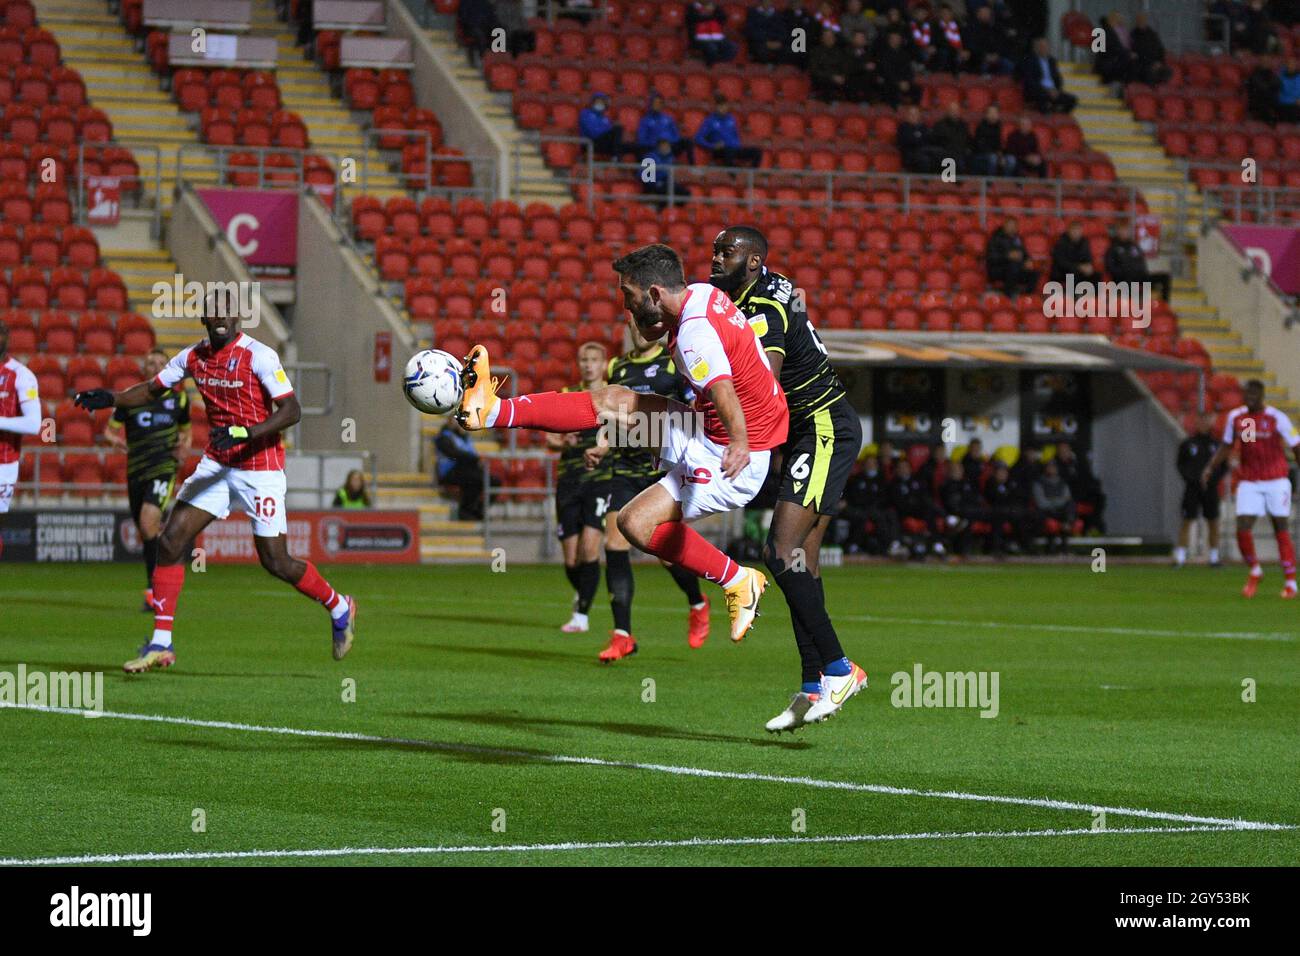 Rotherham United's Will Grigg opens the scoring.Picture: Liam Ford/AHPIX LTD, Football, EFL, Papa Johns Trophy, Rotherham United v Scunthorpe United, Stock Photo